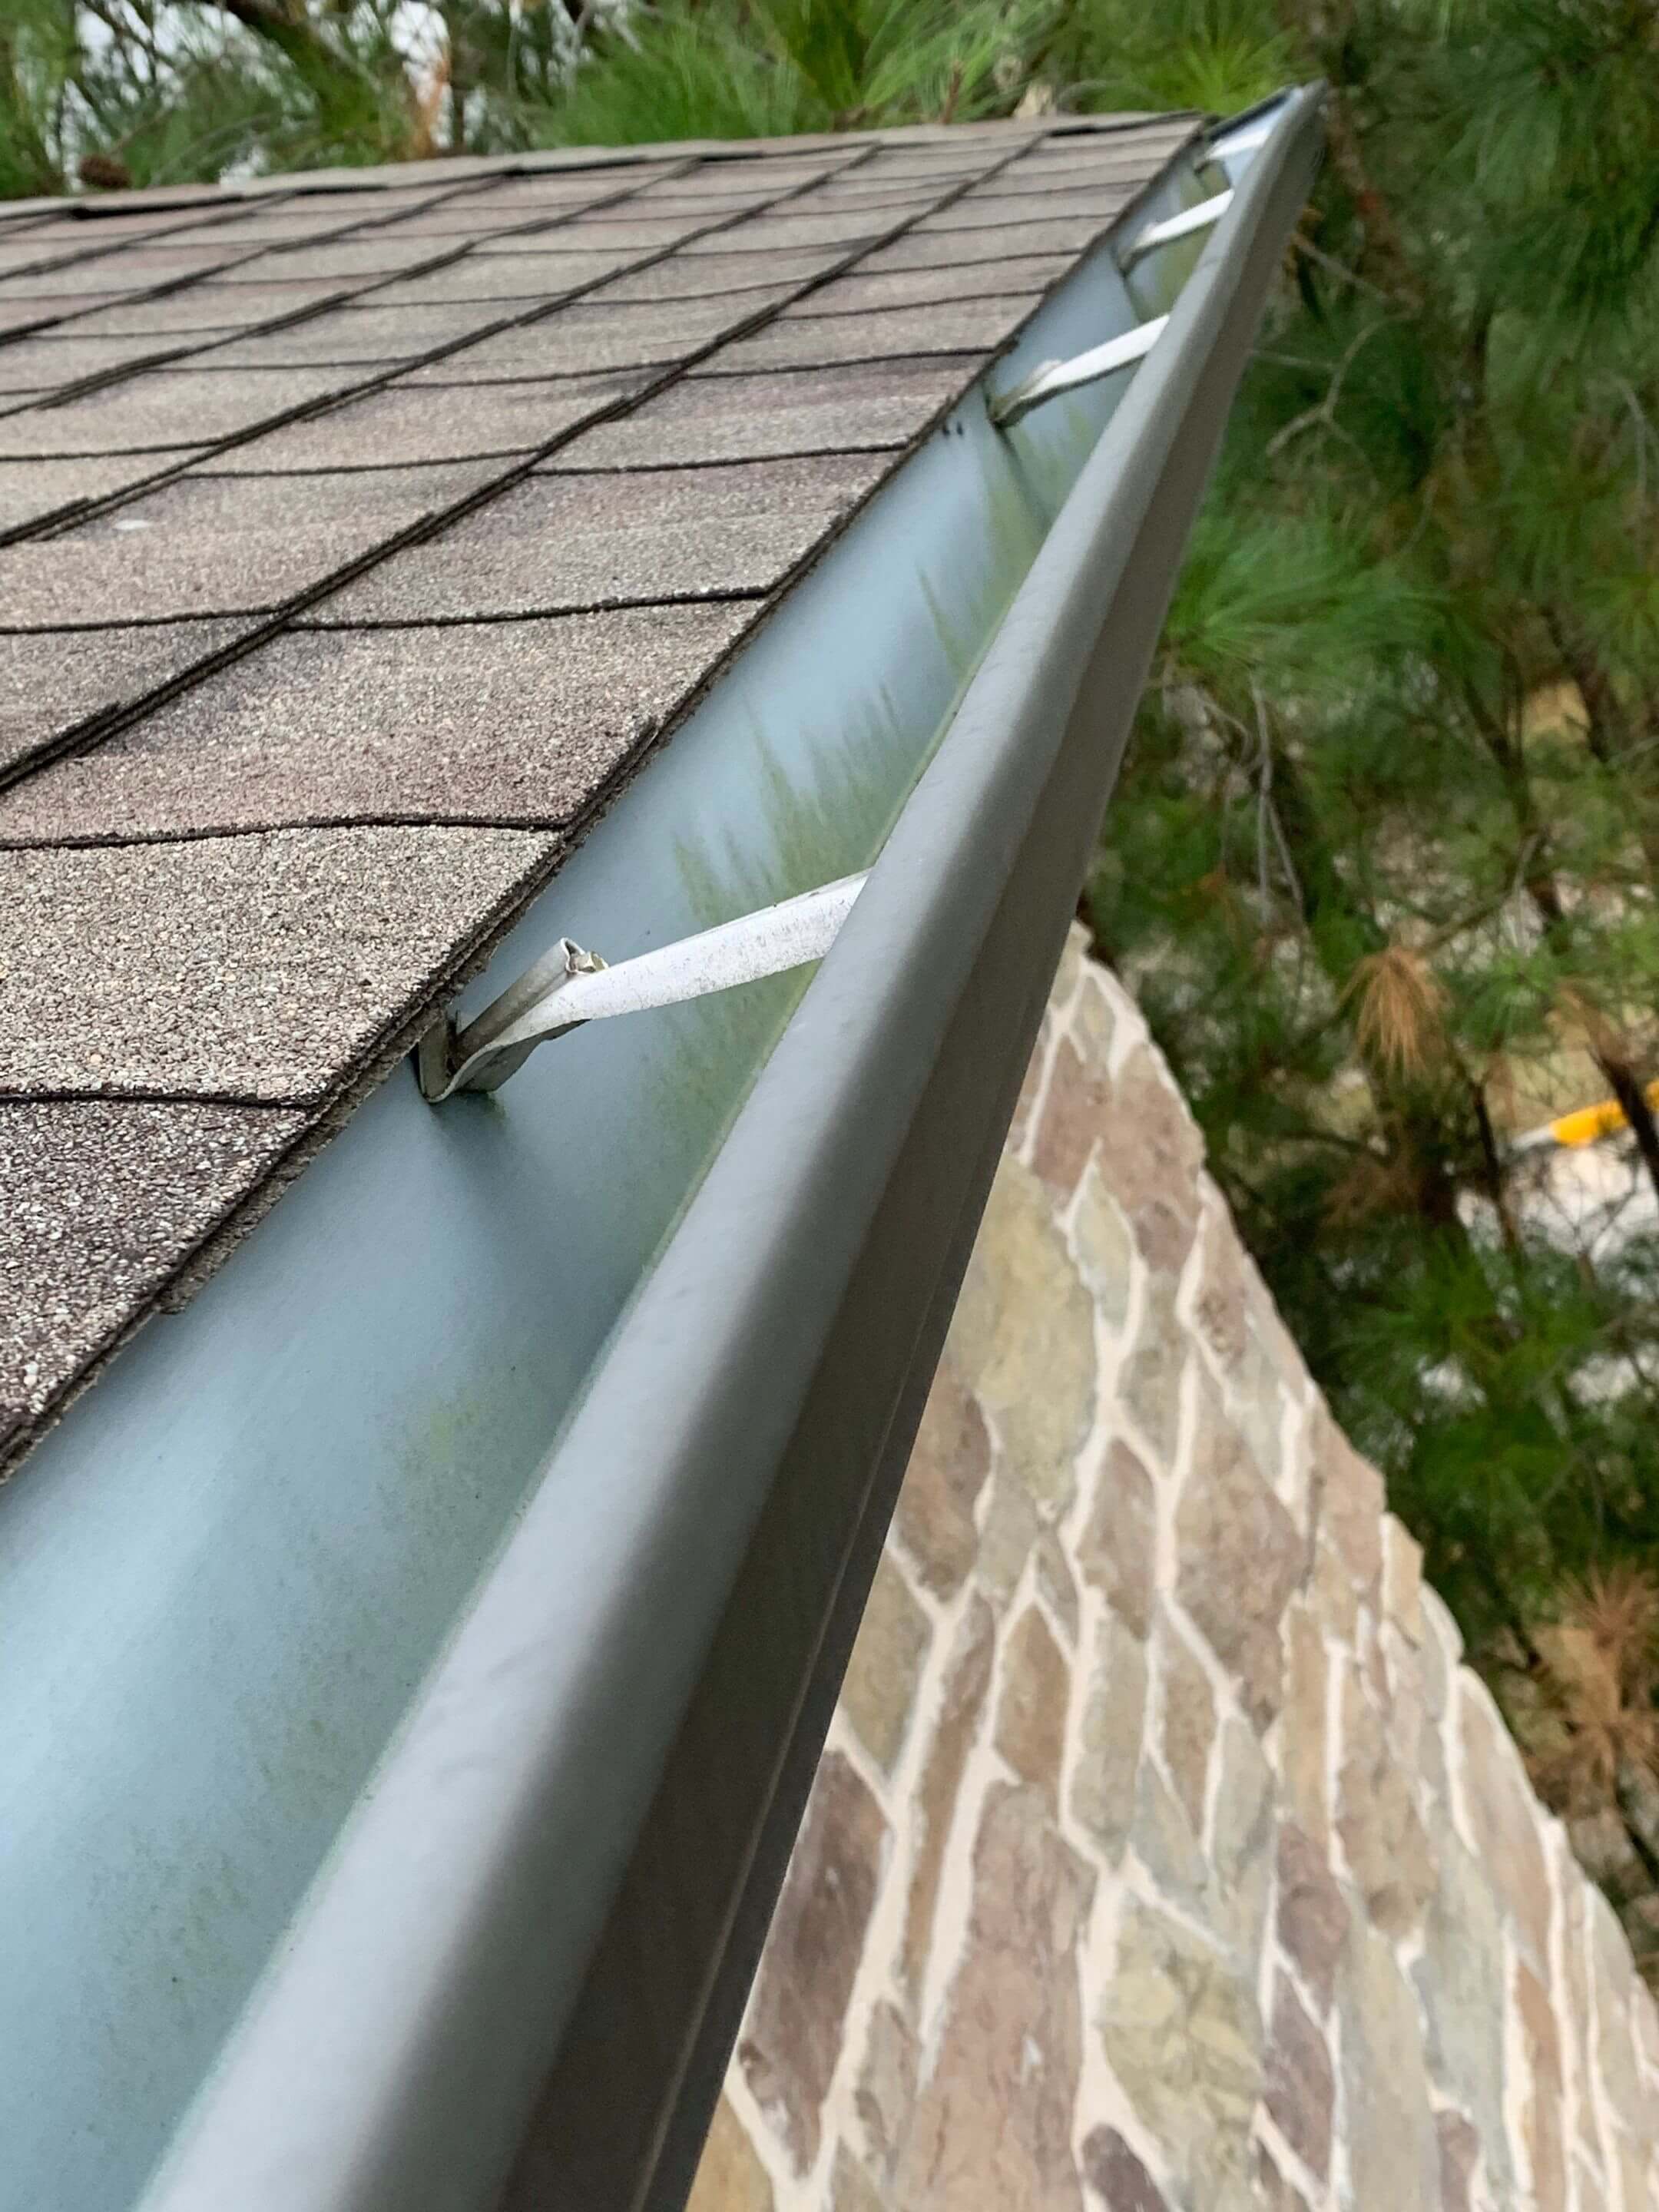 Common Metal Roof Installation Mistakes